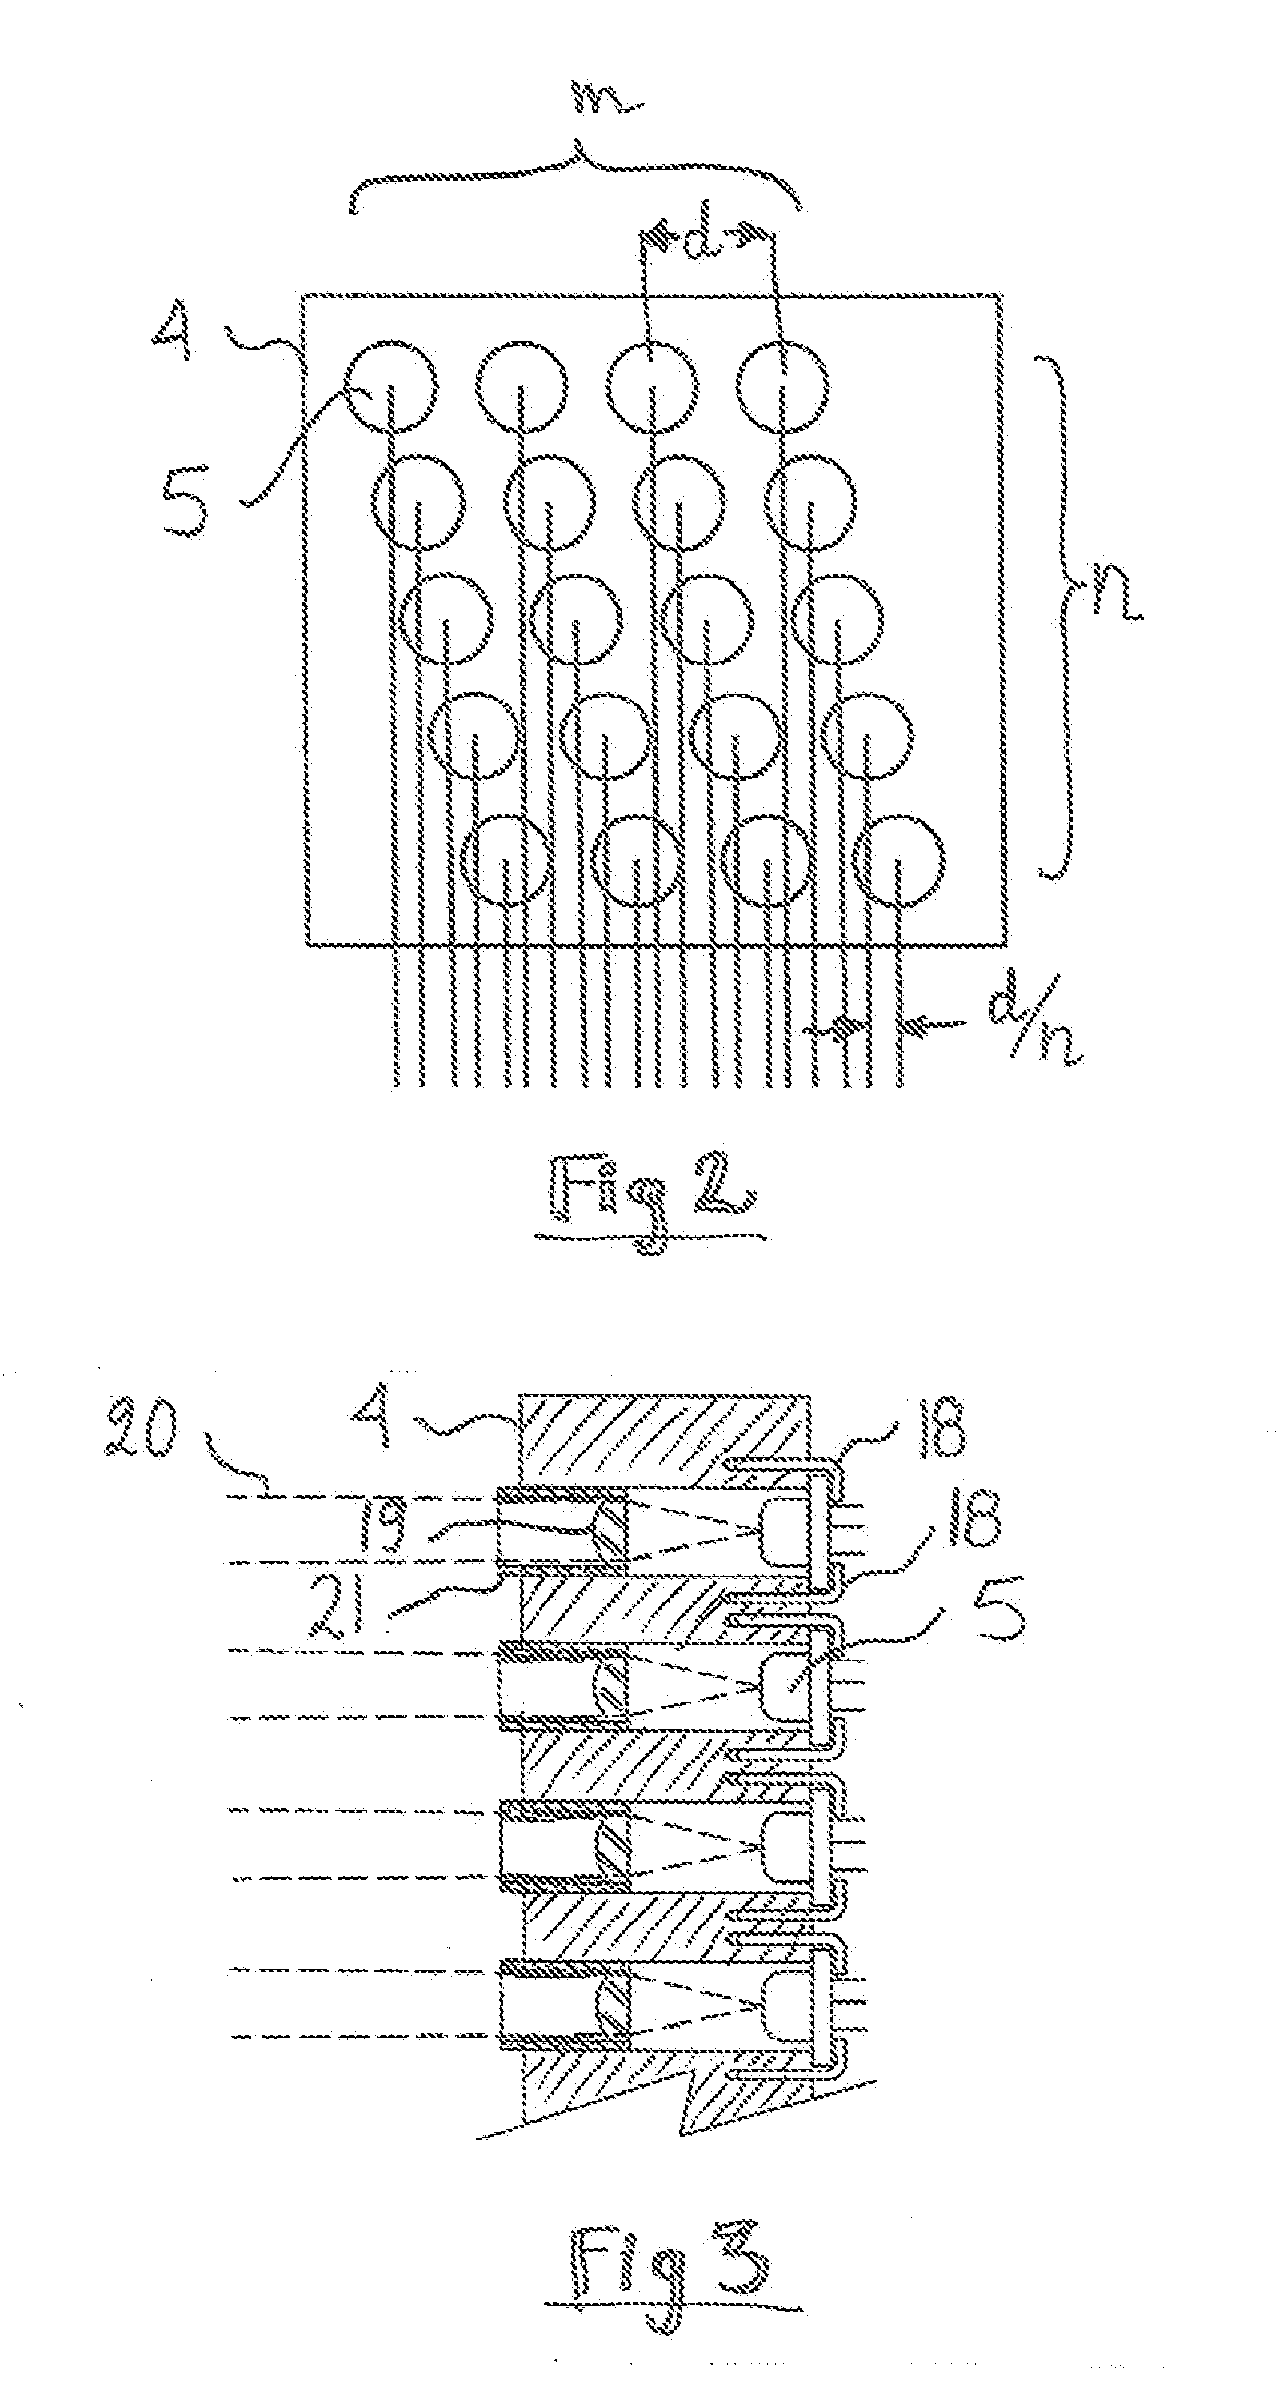 Laser Diode Array Based Photopolymer Exposure System